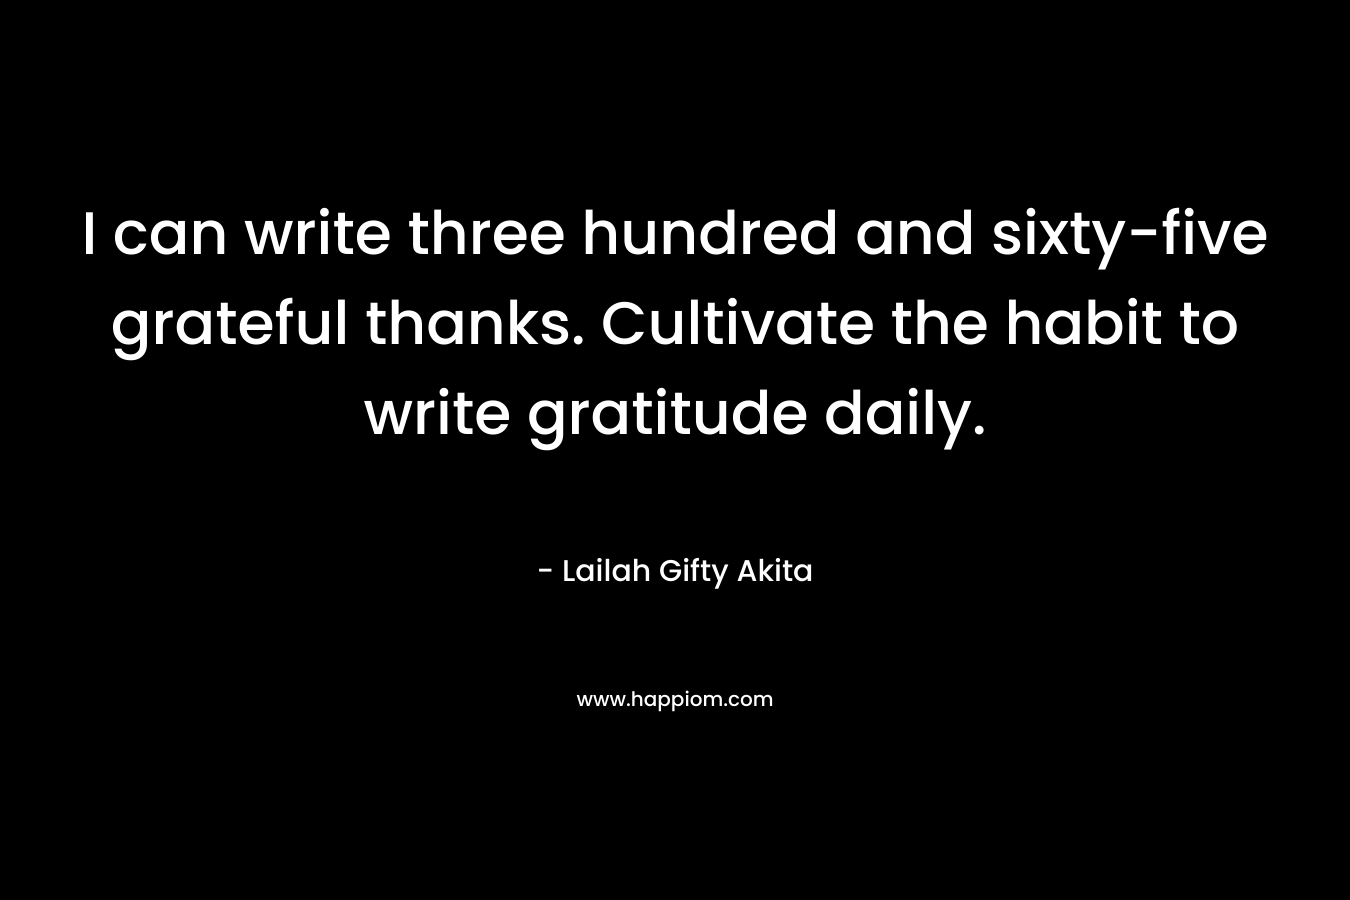 I can write three hundred and sixty-five grateful thanks. Cultivate the habit to write gratitude daily.